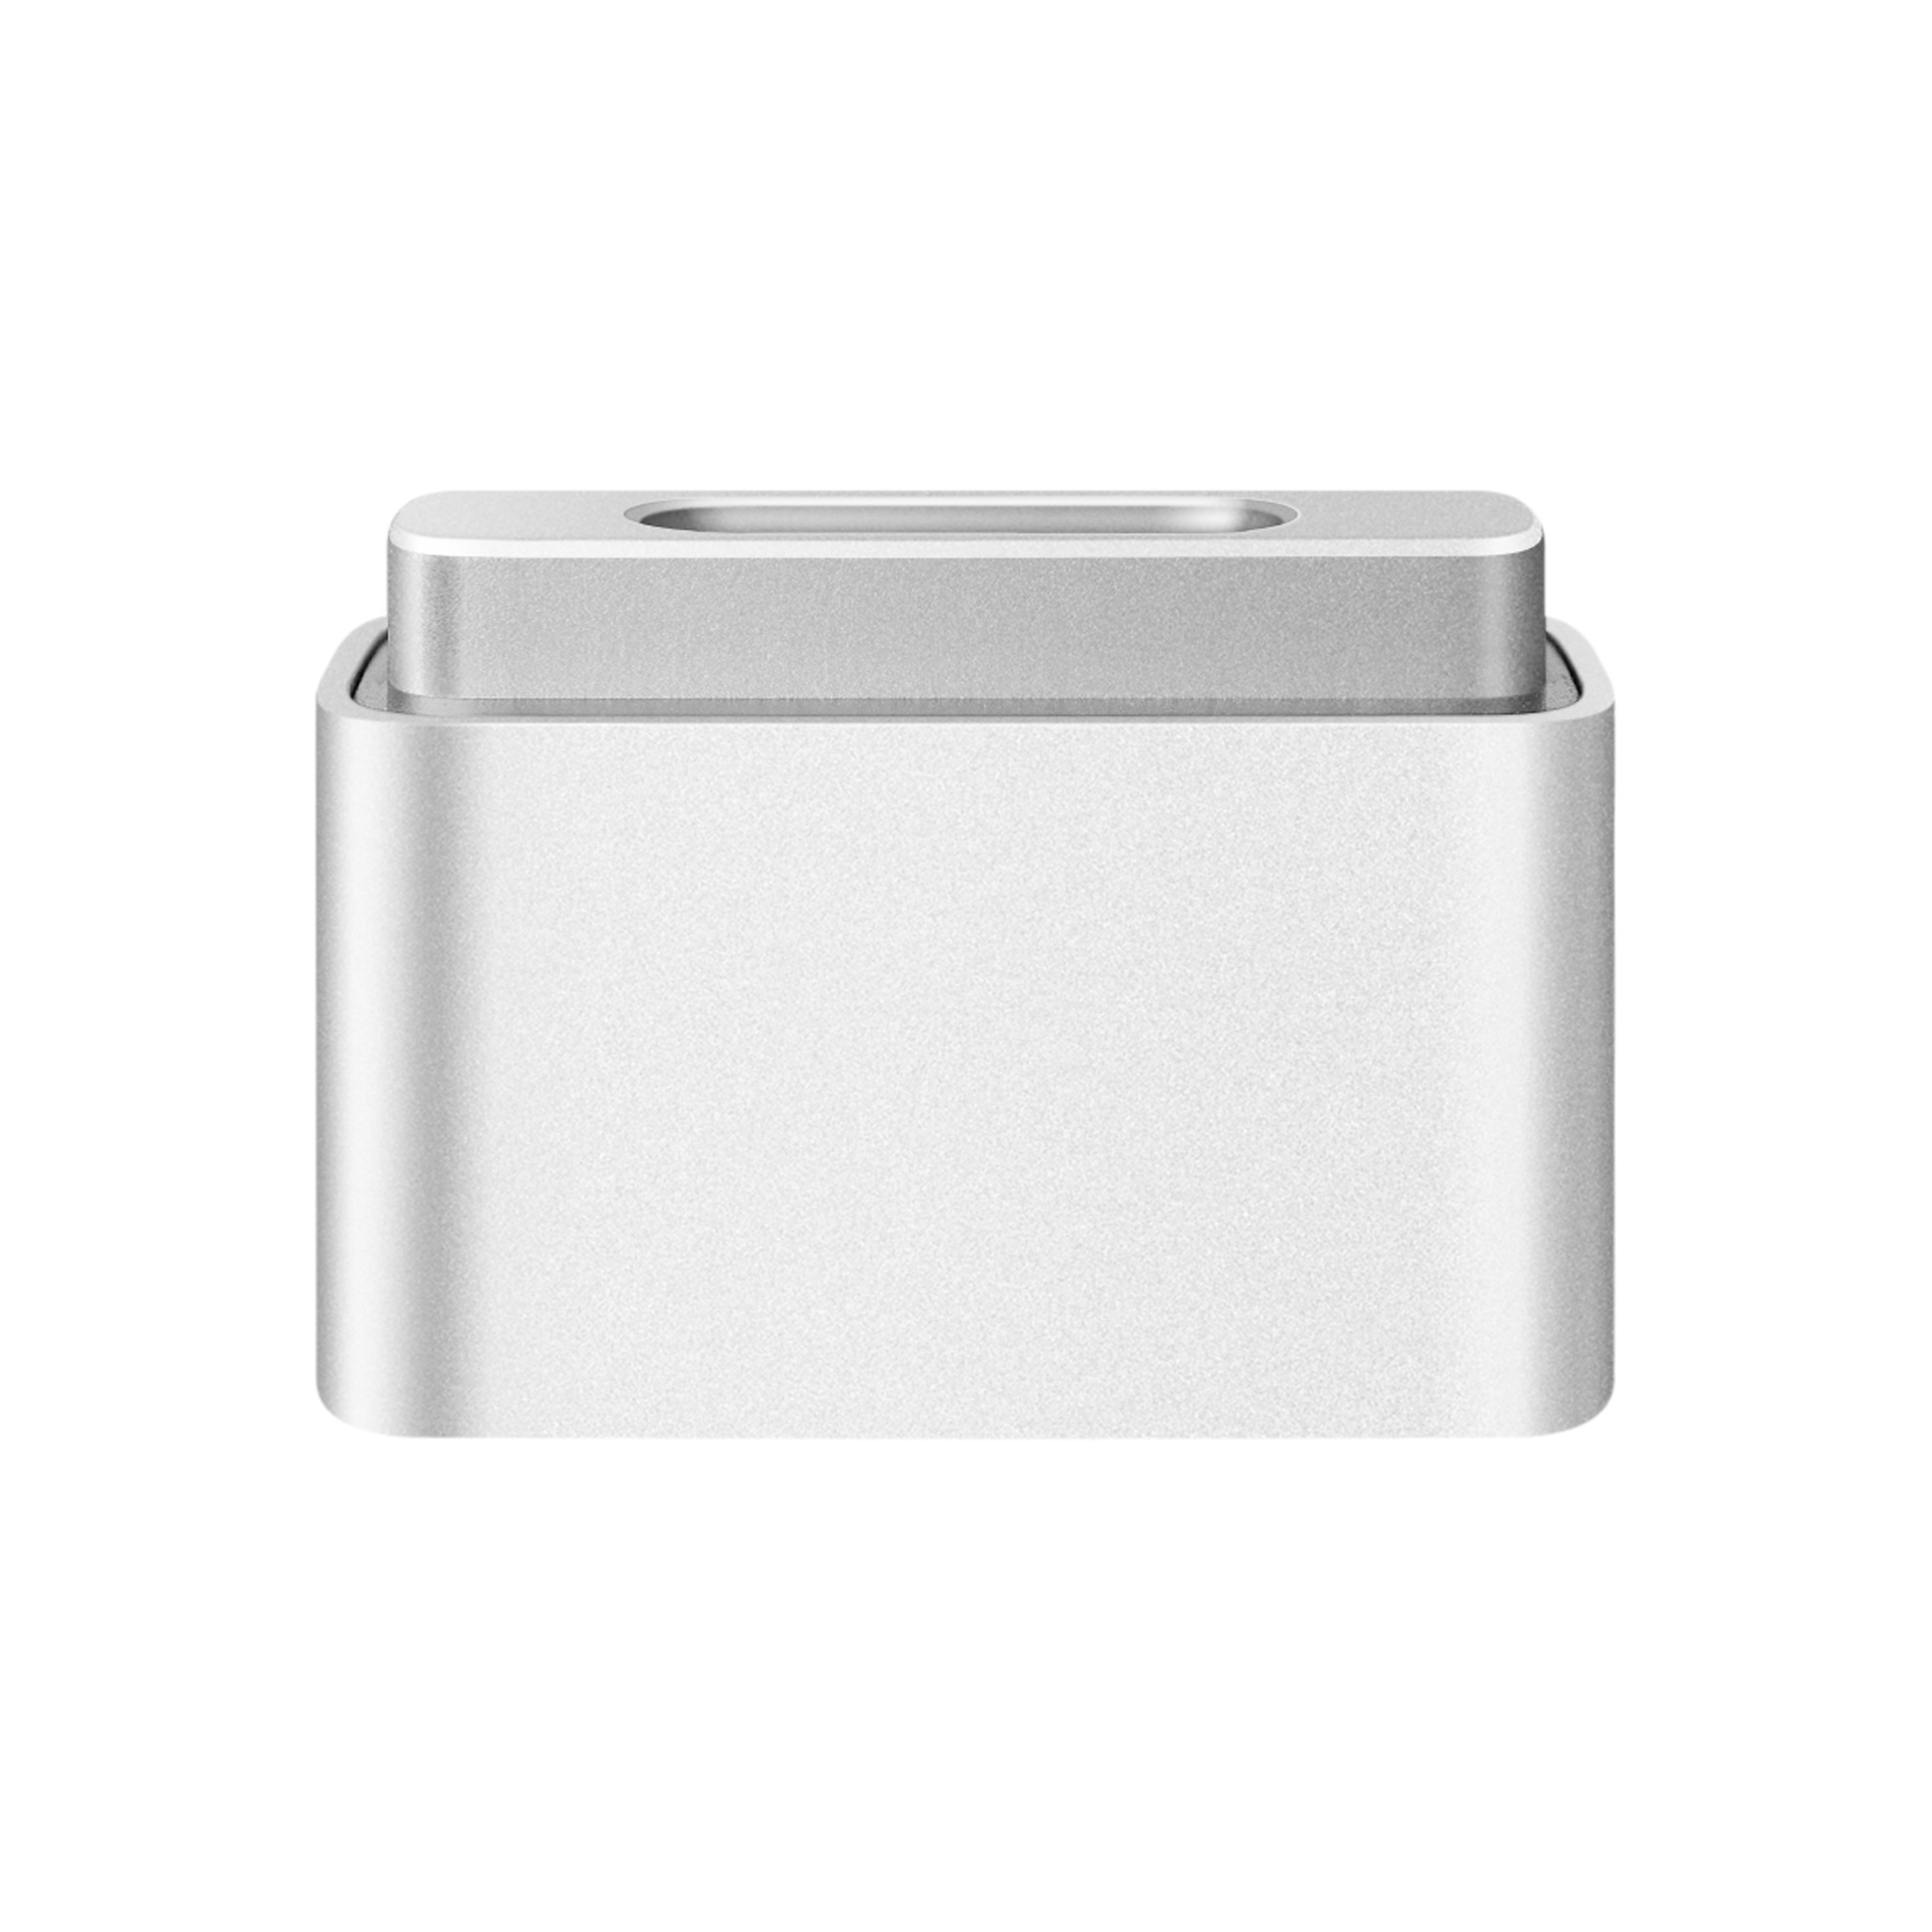 a silver rectangular object with a white background